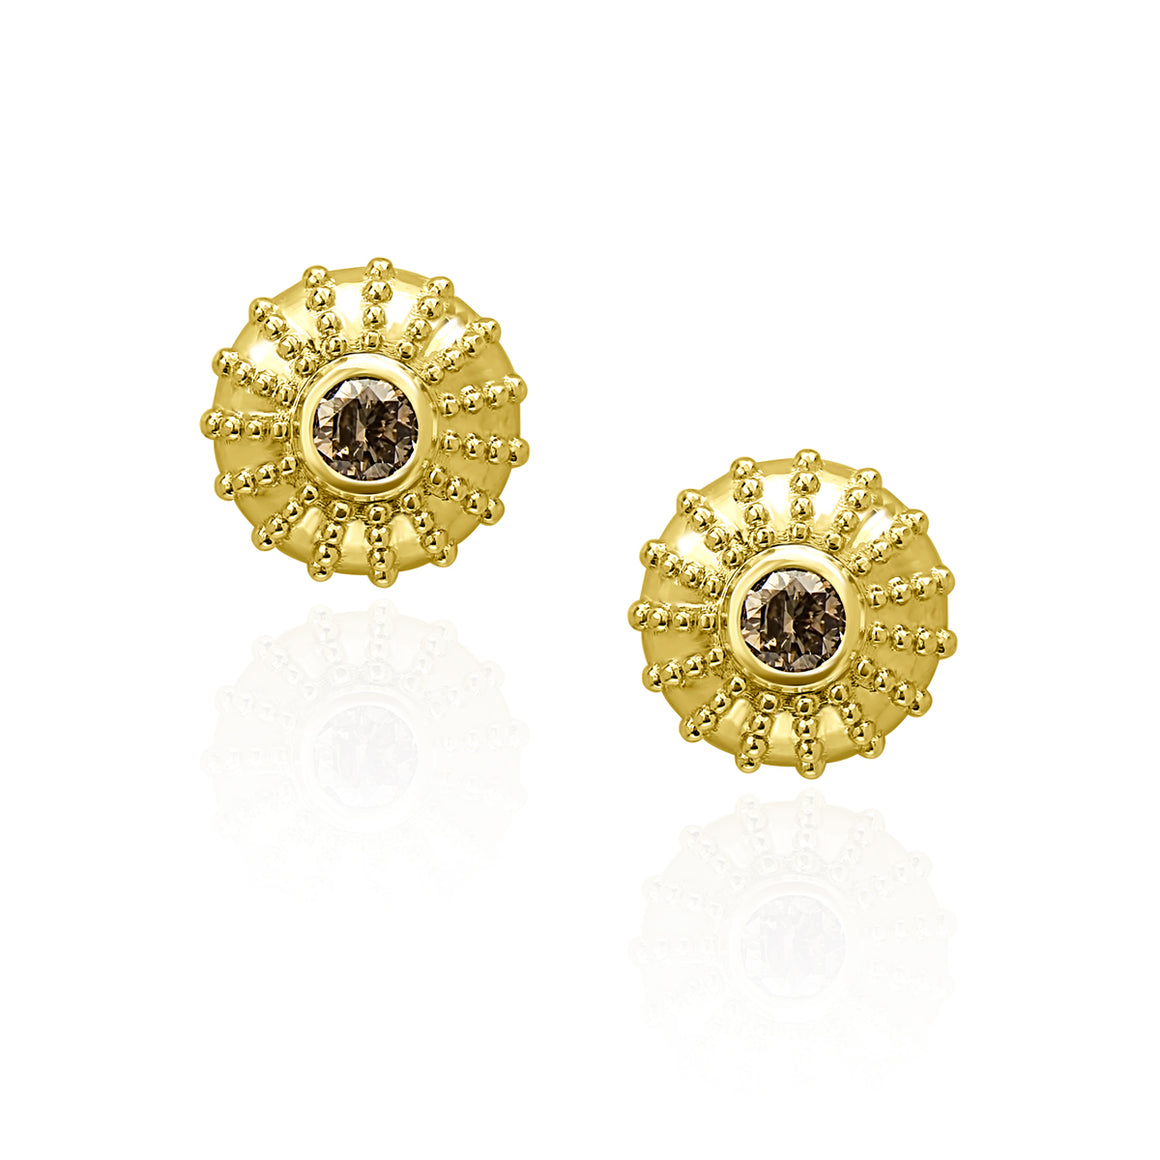 1CT Champage Natural Diamond earrings 18KT Yellow Gold Round Design Diamond earrings